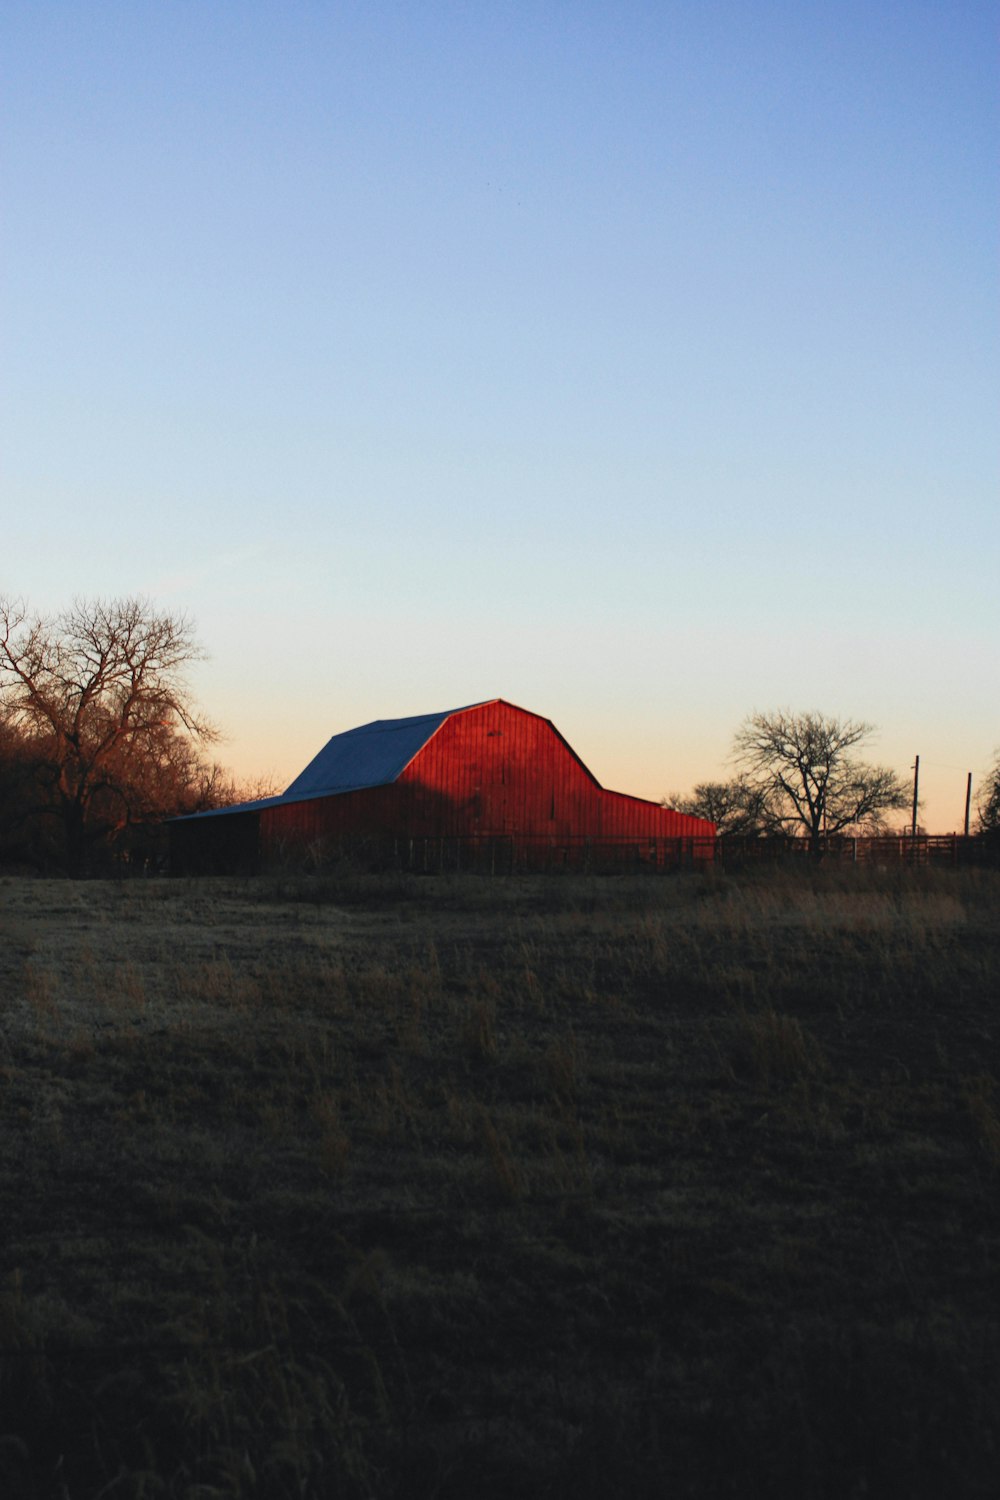 a red barn in a field with trees in the background